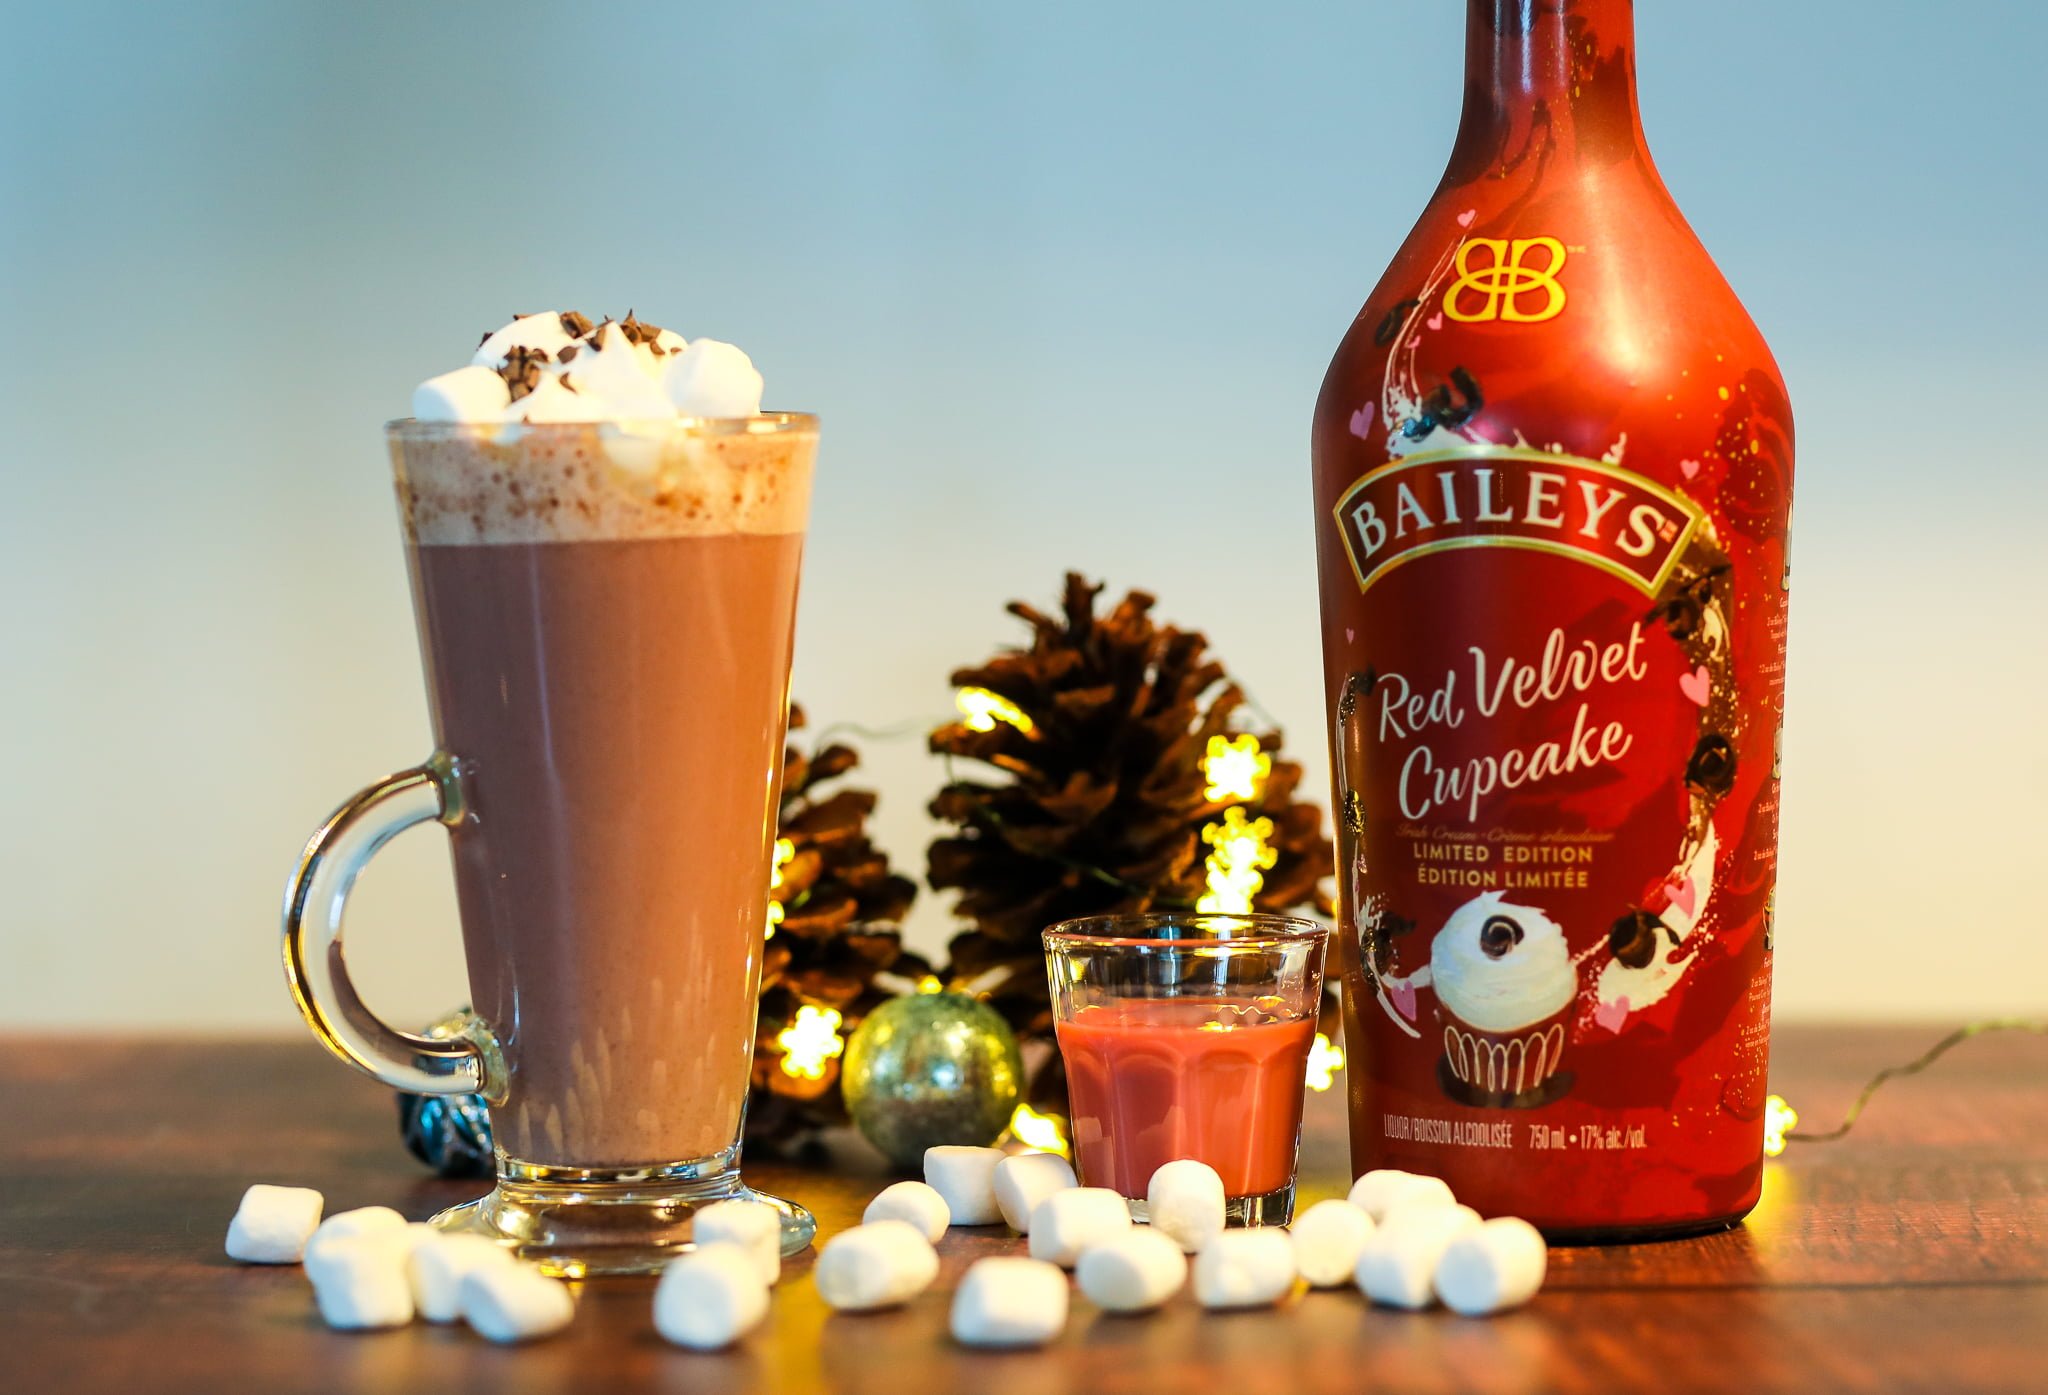 Baileys Red Velvet Hot Chocolate The perfect winter